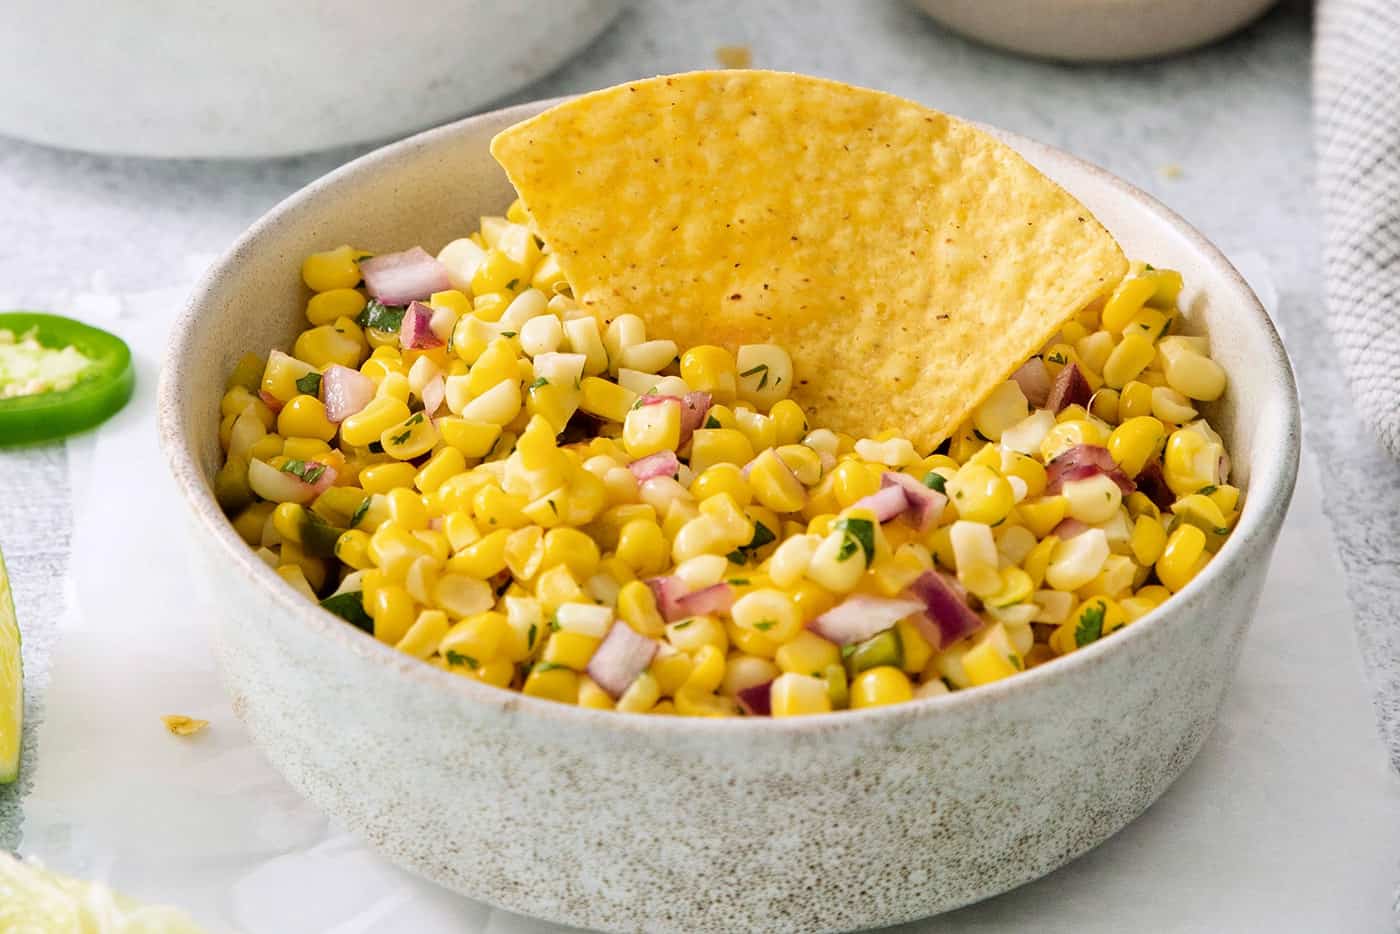 A tortilla chip in a bowl of roasted chili corn salsa